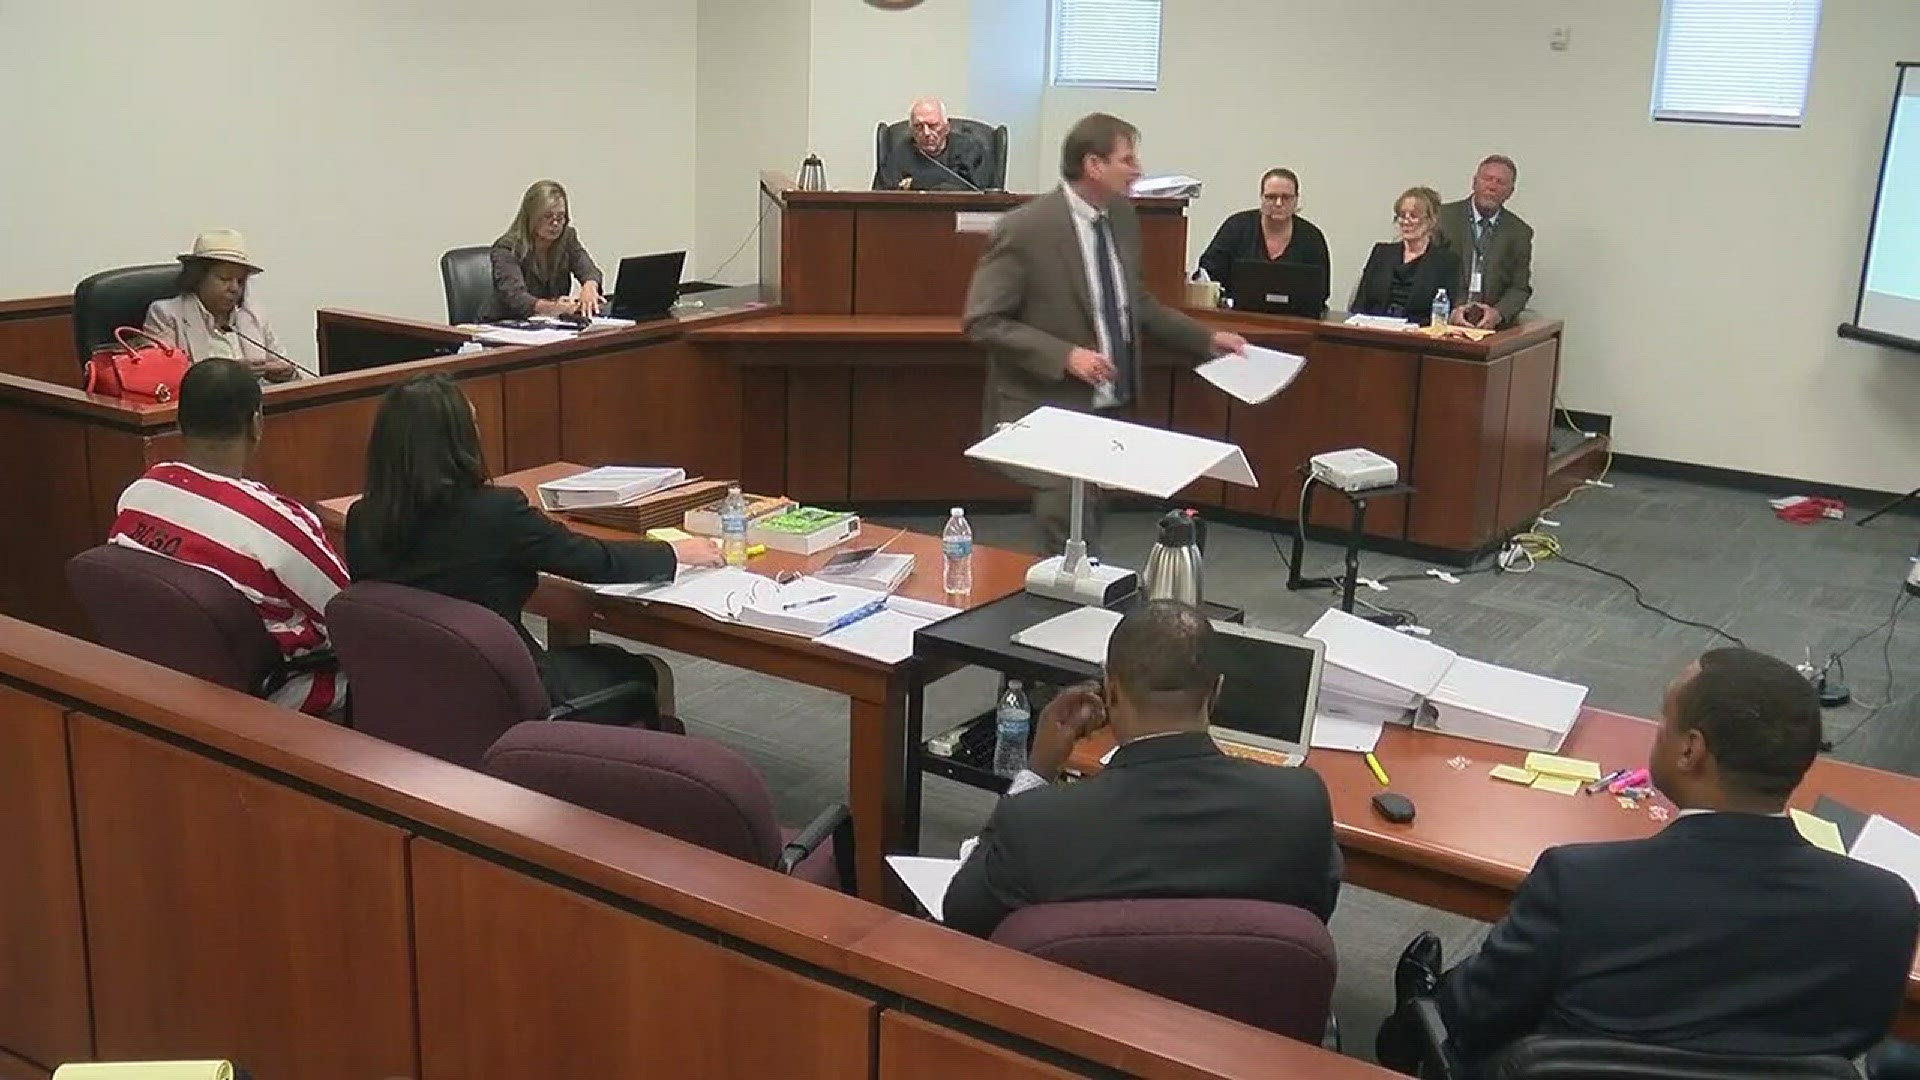 Attorneys are trying to overturn Rodney Reed's conviction. He's on death row for the 1996 murder of Stacey Stites. Wednesday, Reed's former defense attorney testified.